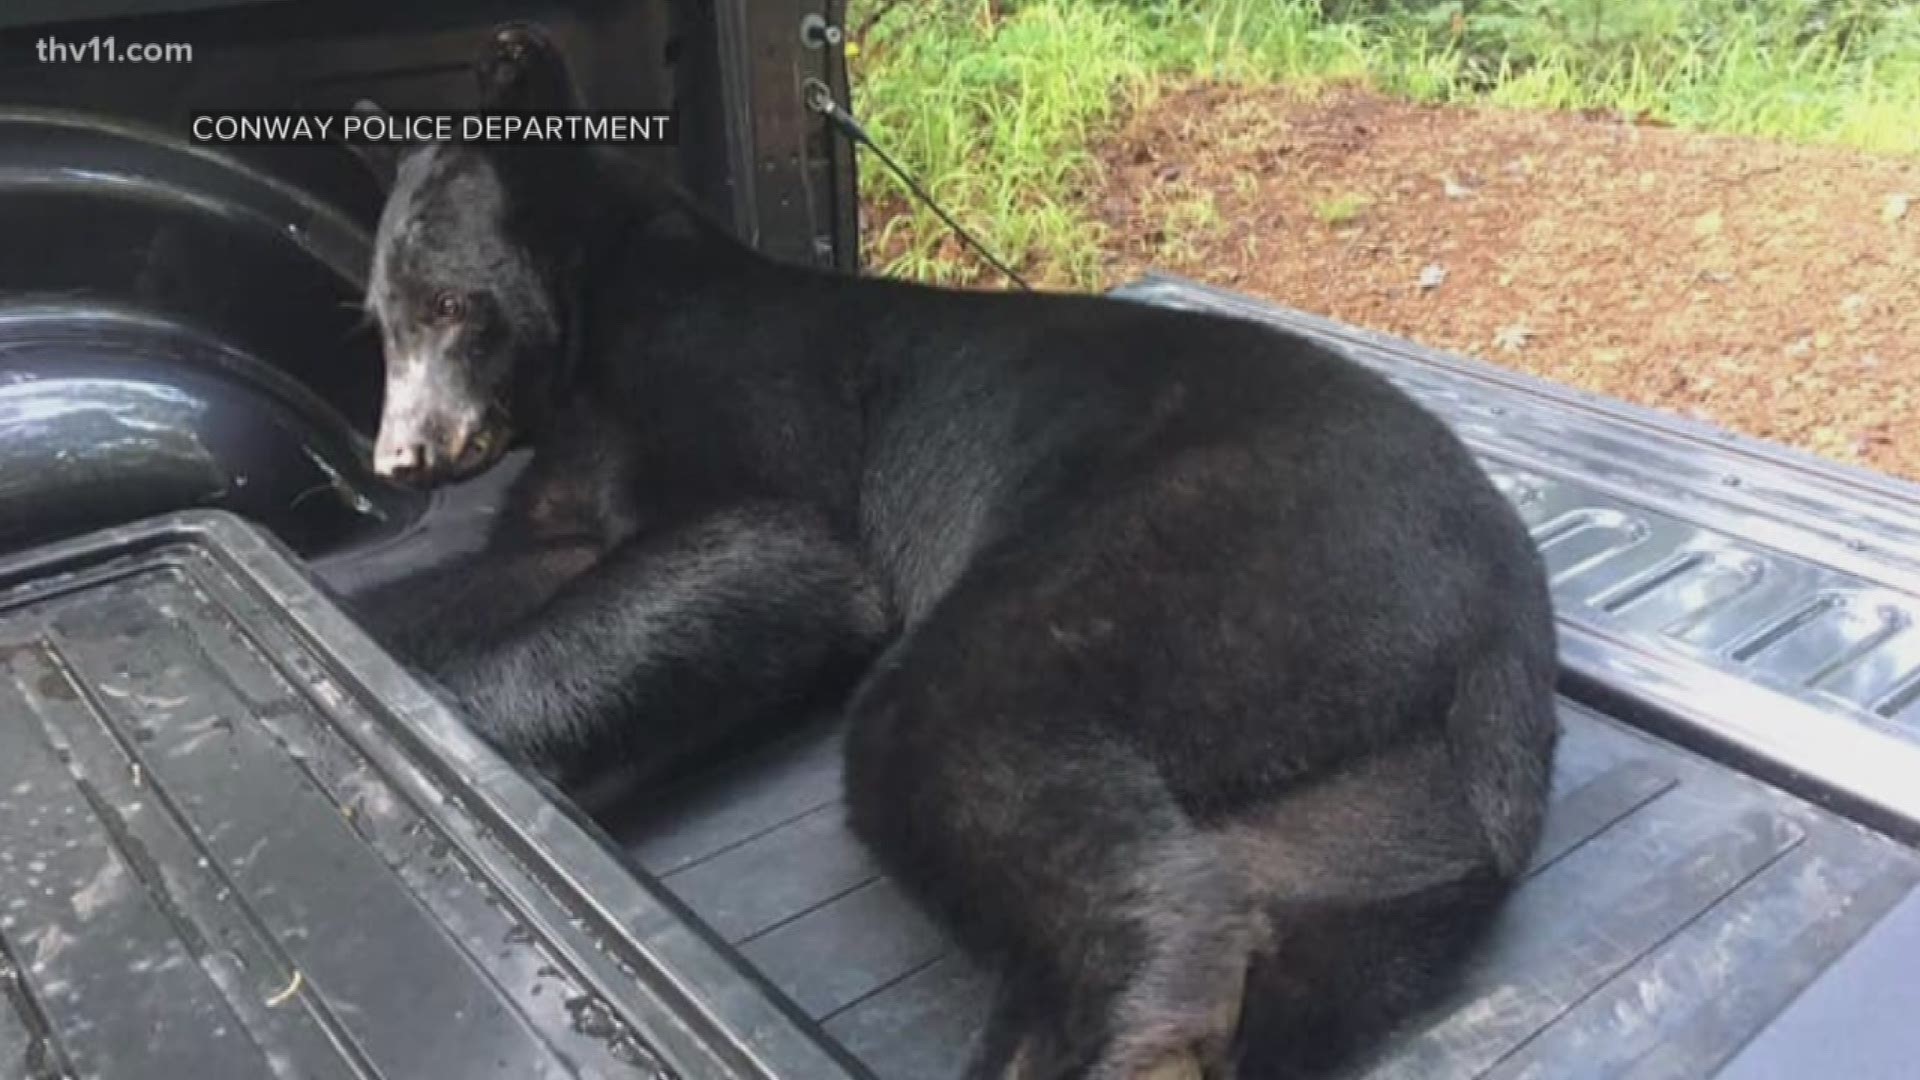 A black bear has returned home to the wild tonight after causing quite a scare in one Conway neighborhood this morning.